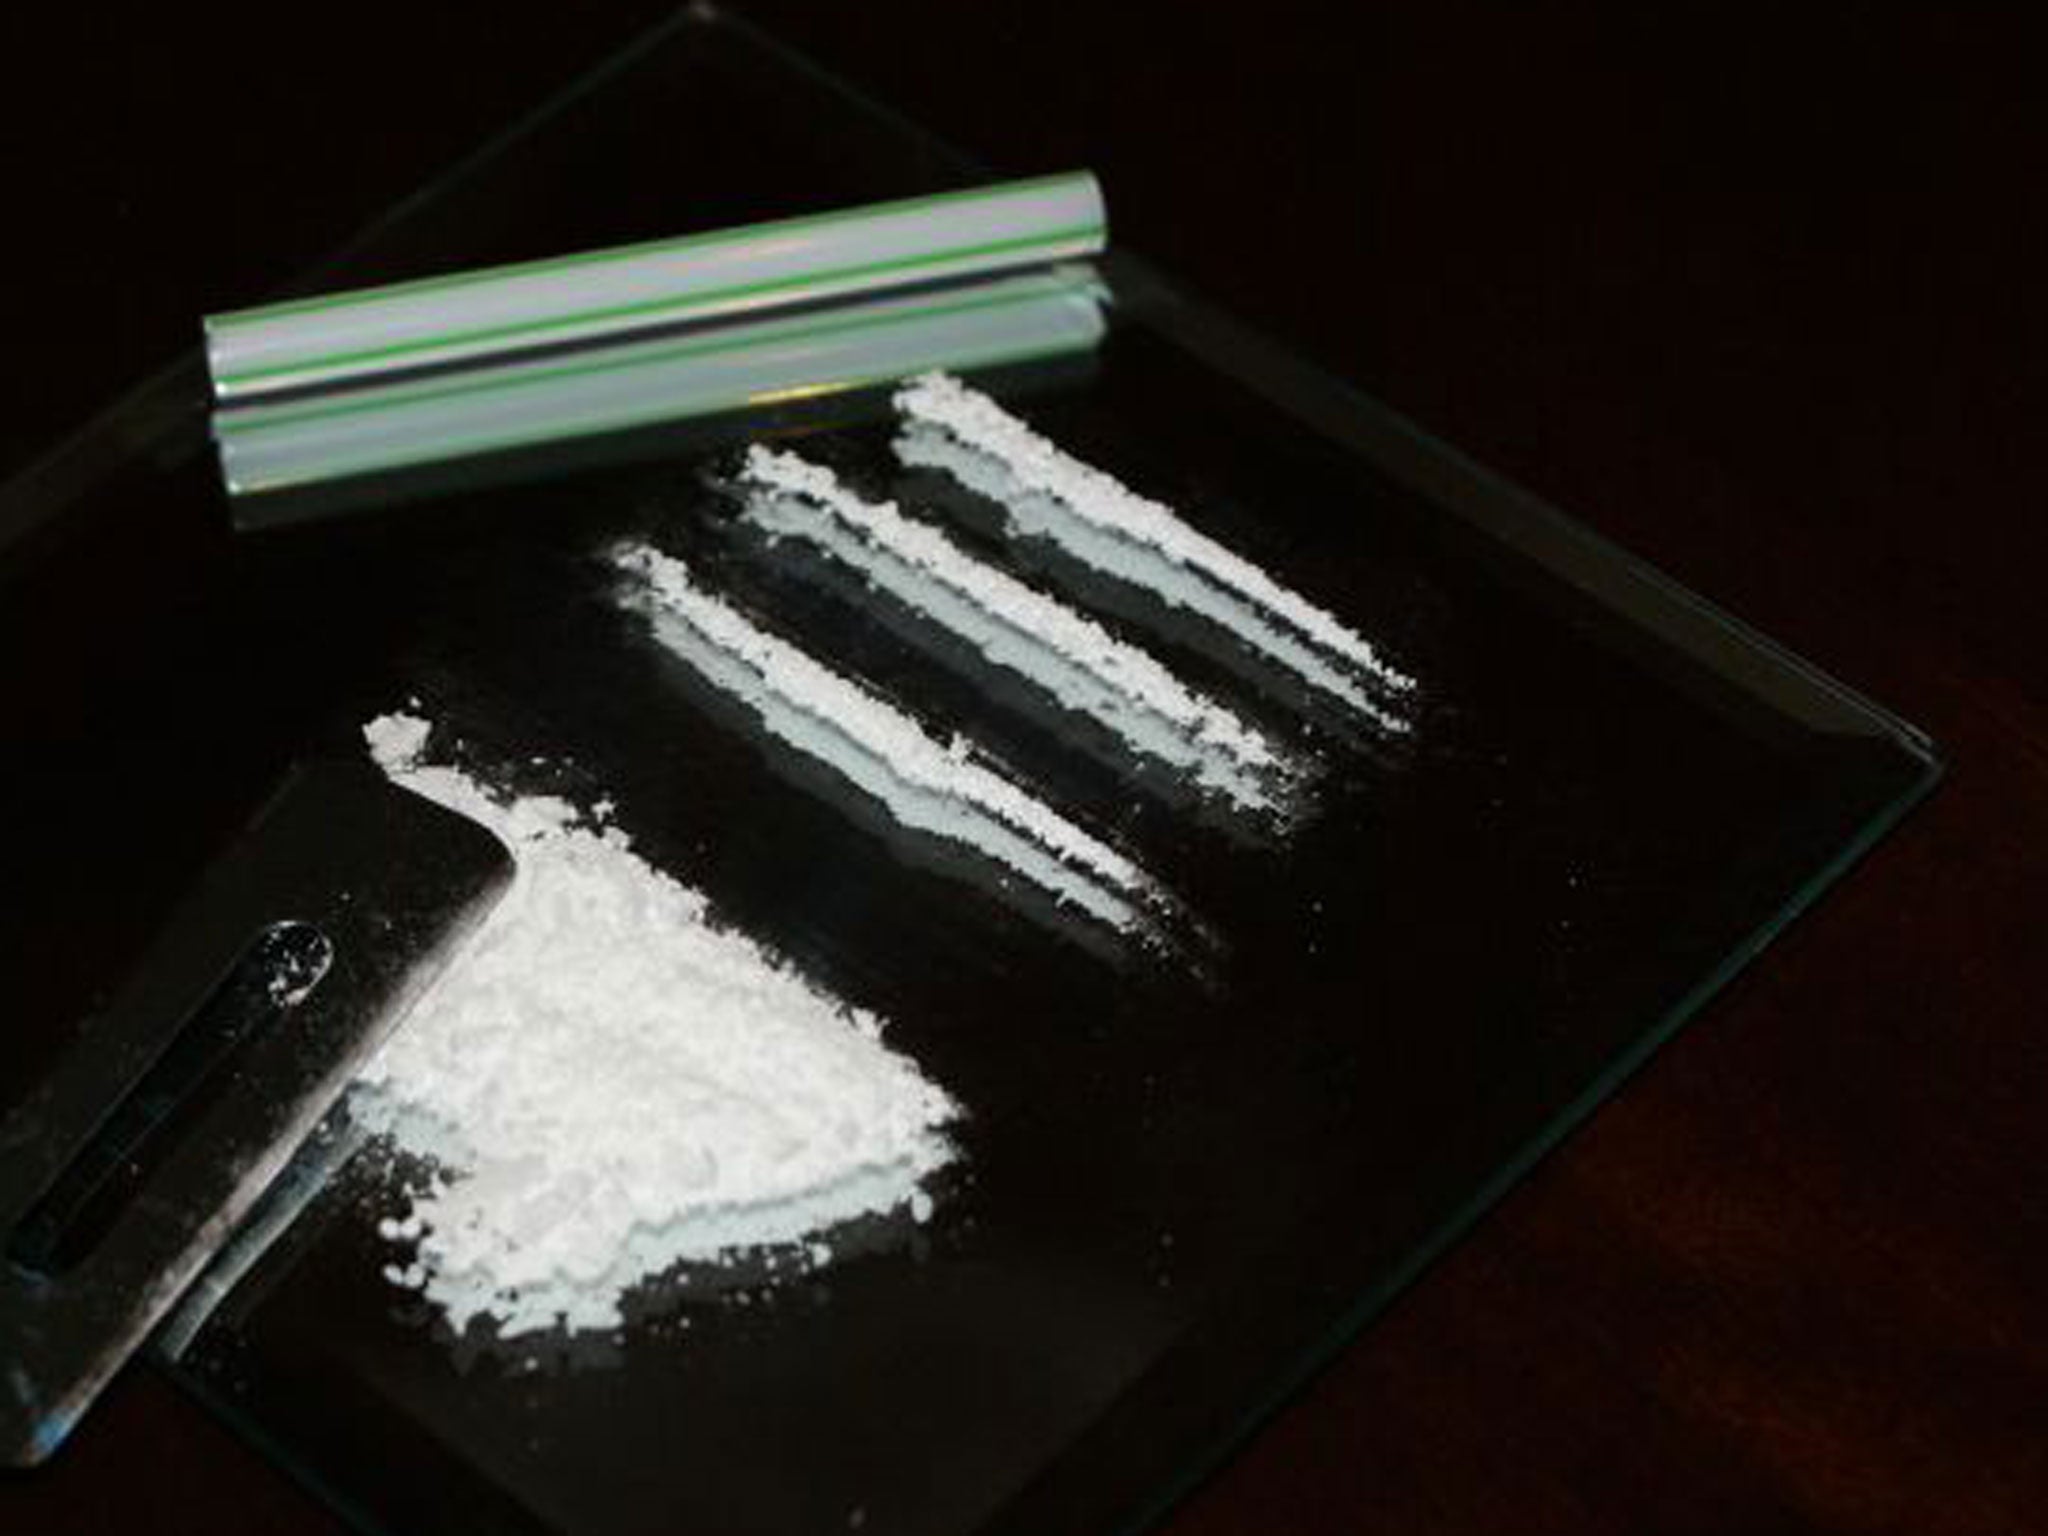 London is the cocaine capital of Europe and has the highest use of the drug than any other city, new research published today has found.